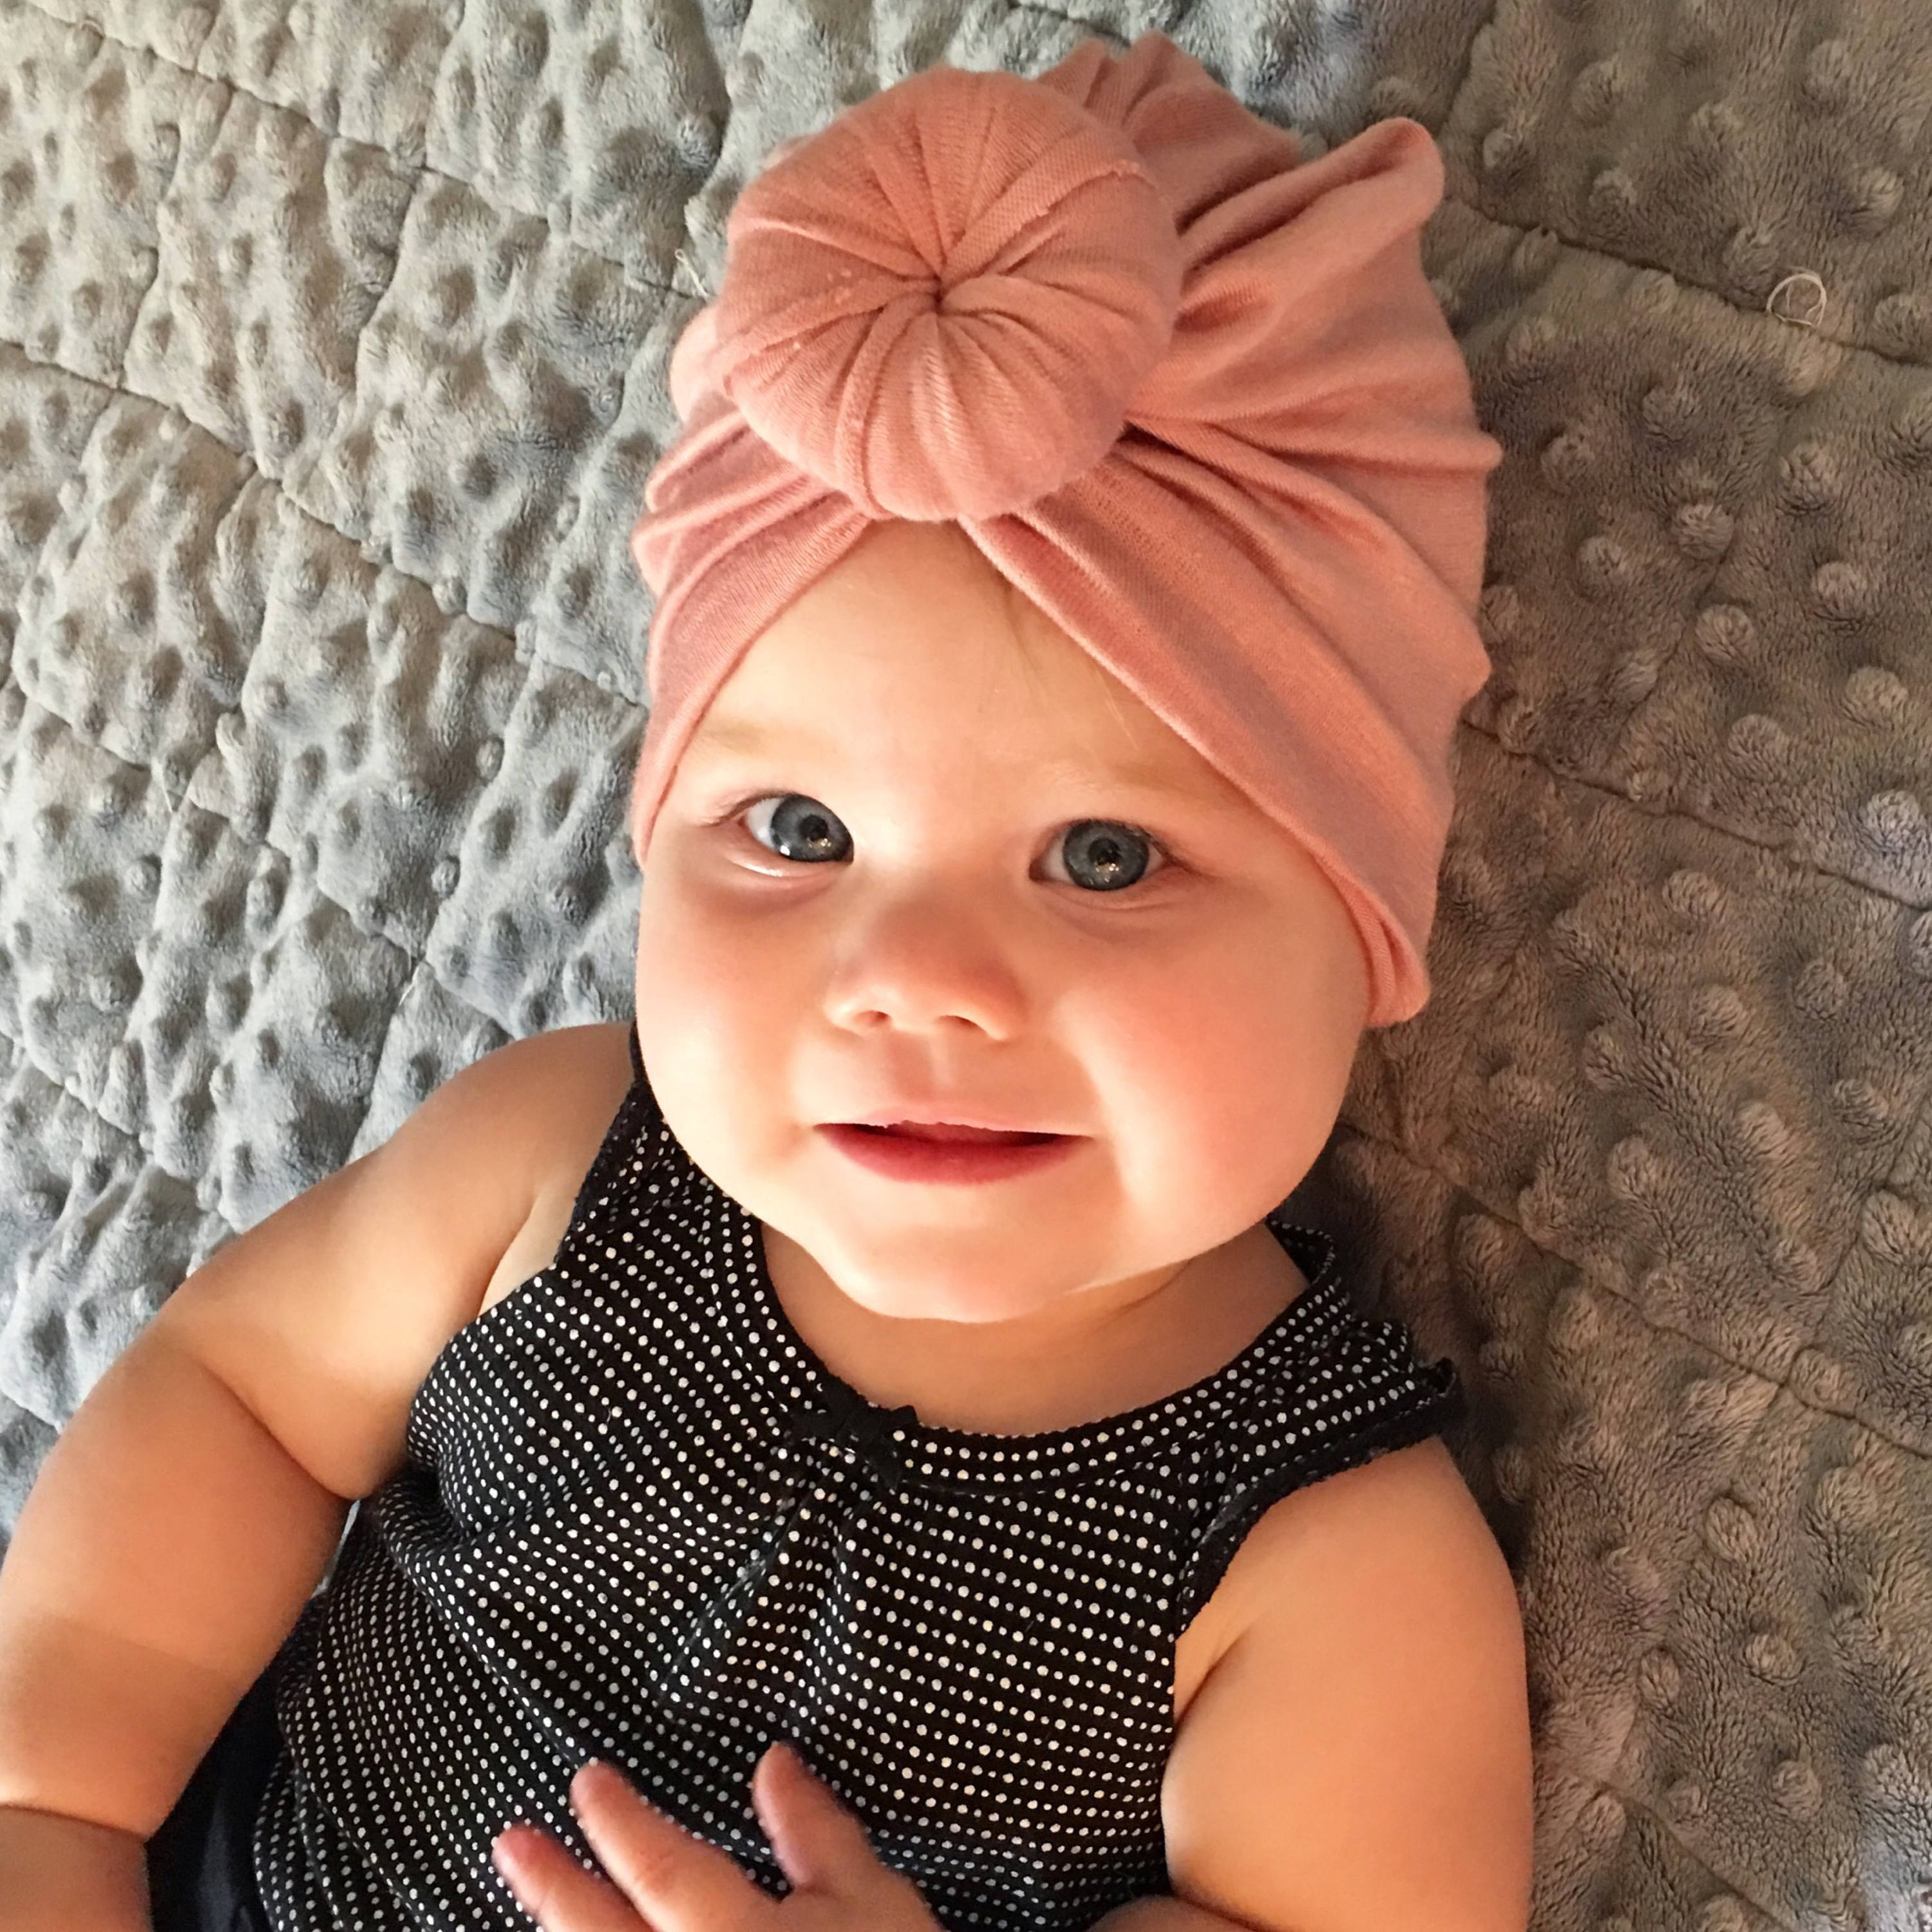 Child with Turban - Baby, Child, Cute 